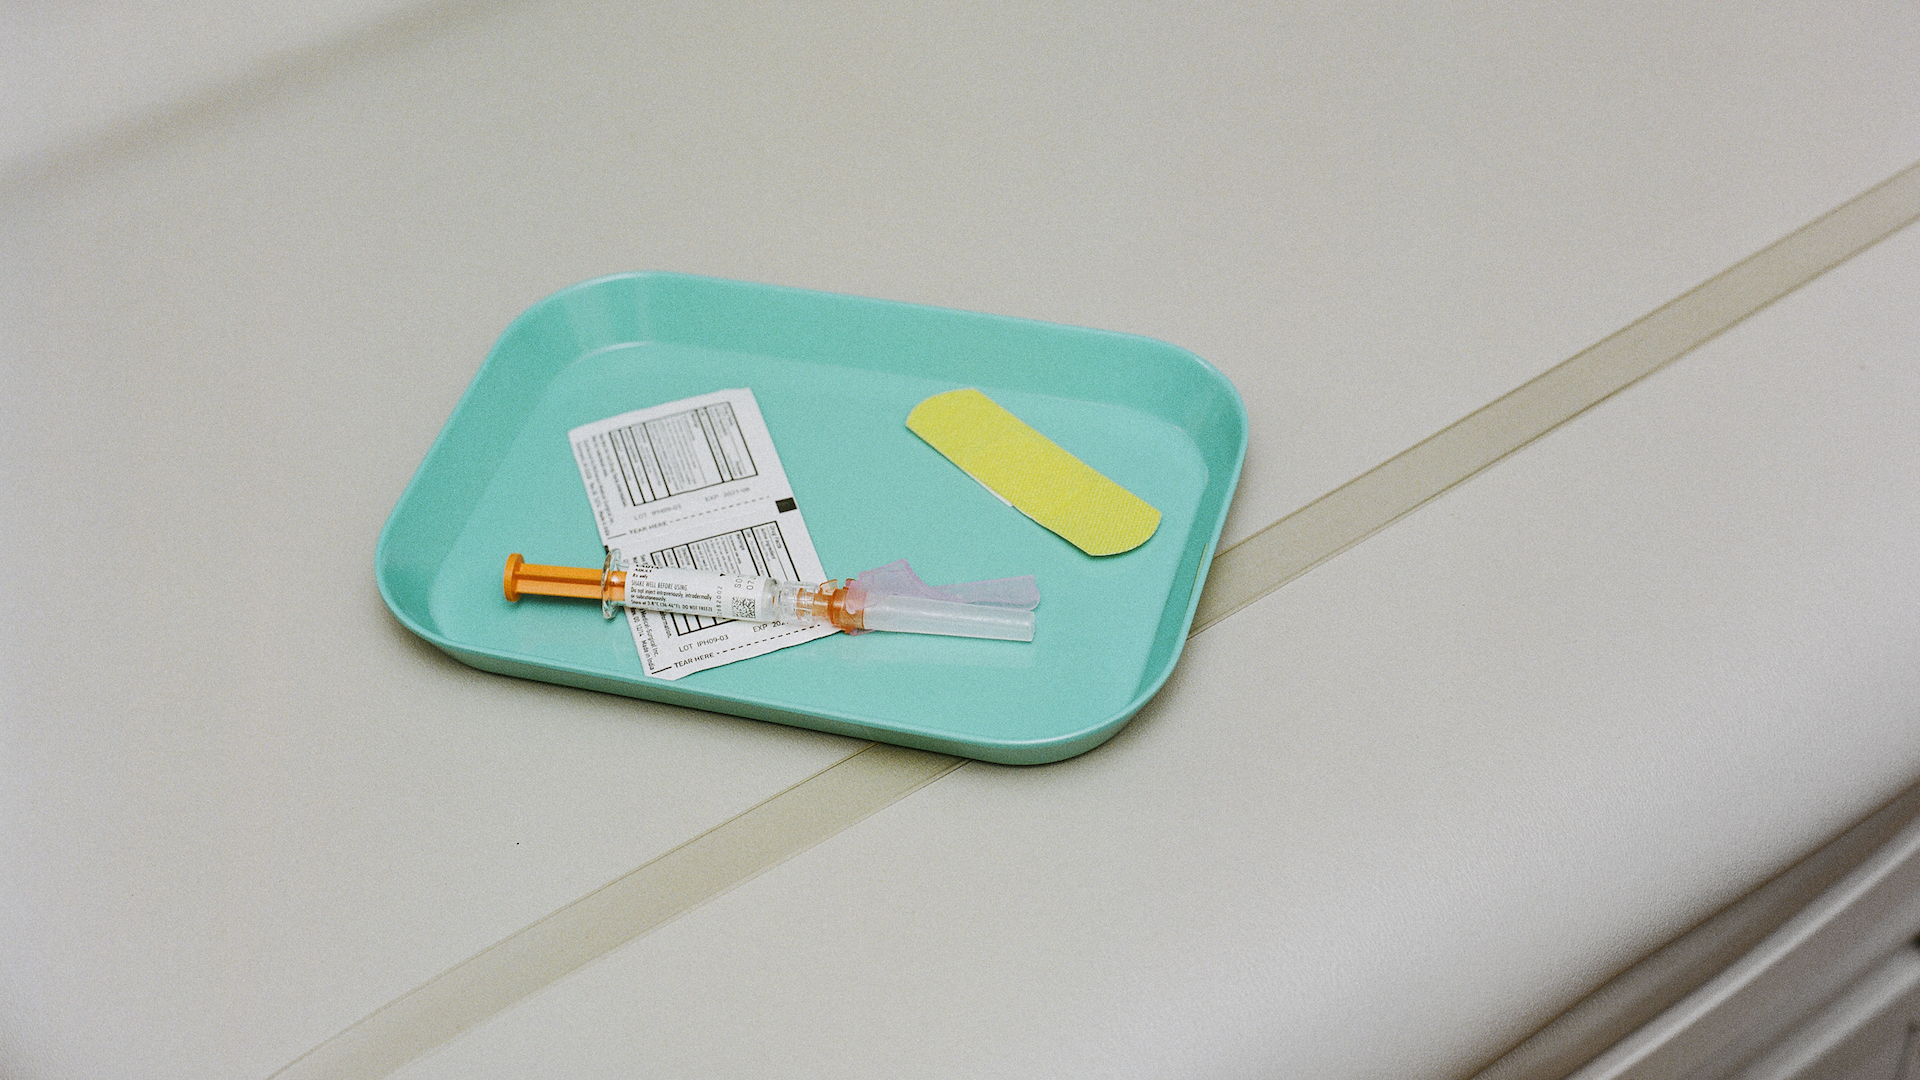 Vaccine on a tray with swabs and a band-aid